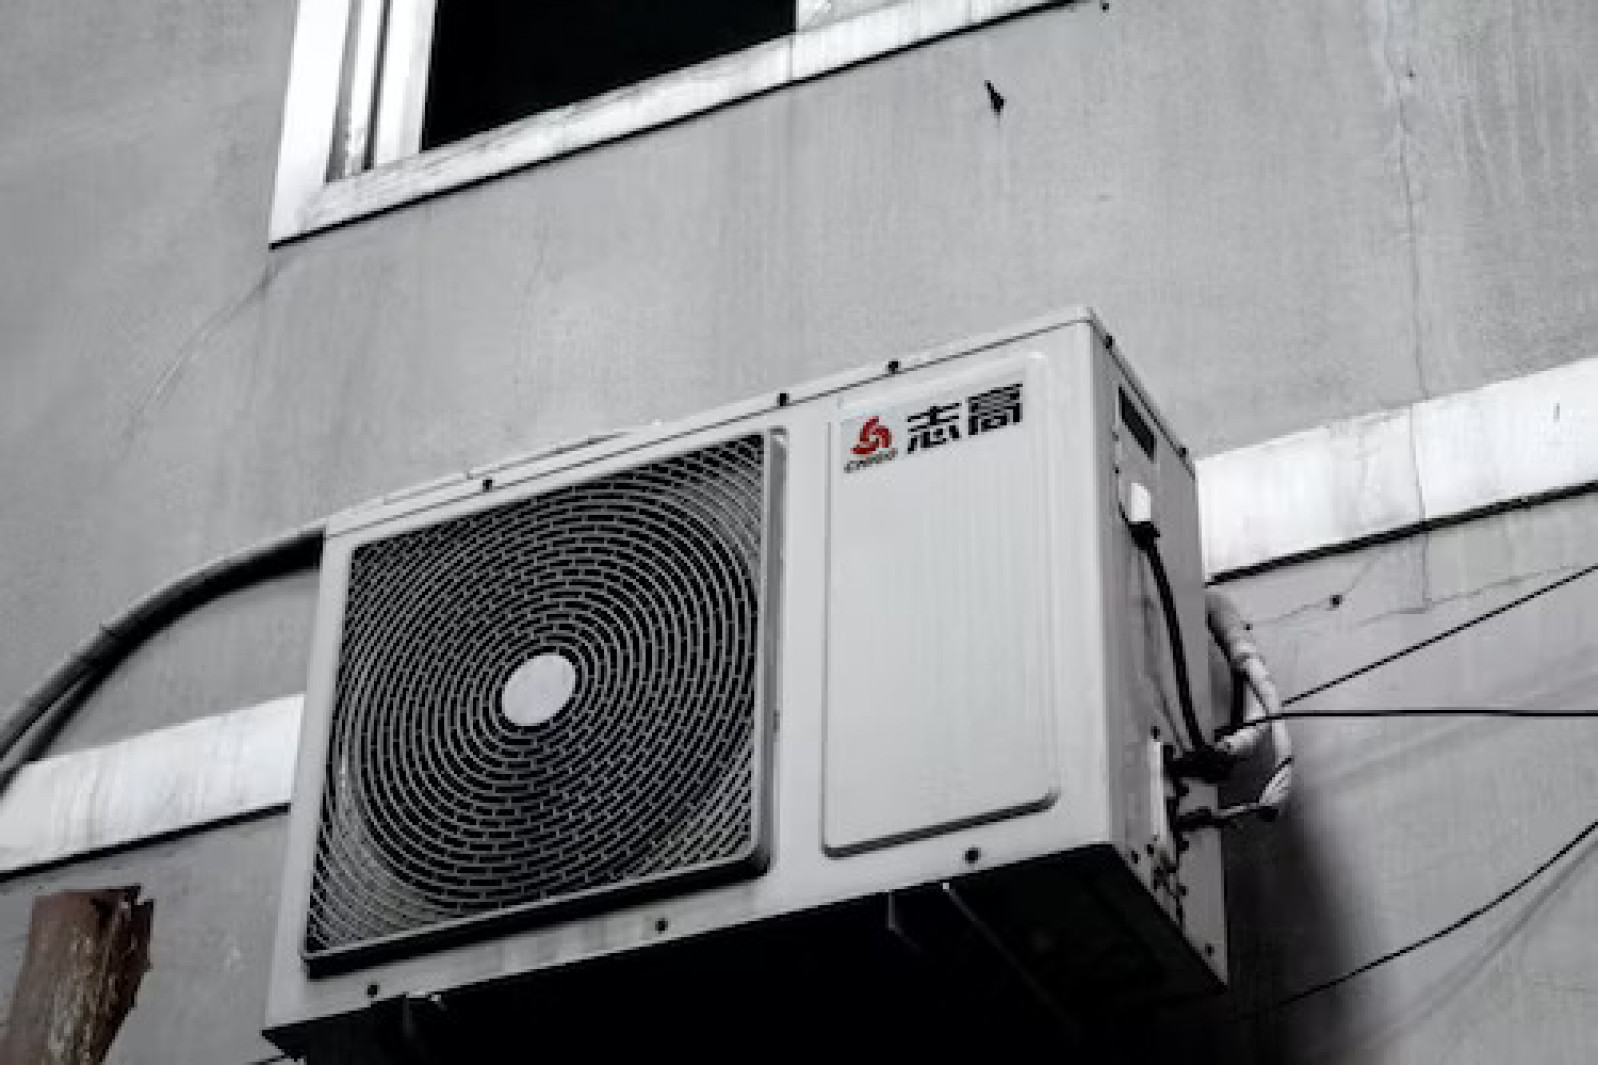 Top tips for using air conditioning in a sustainab...